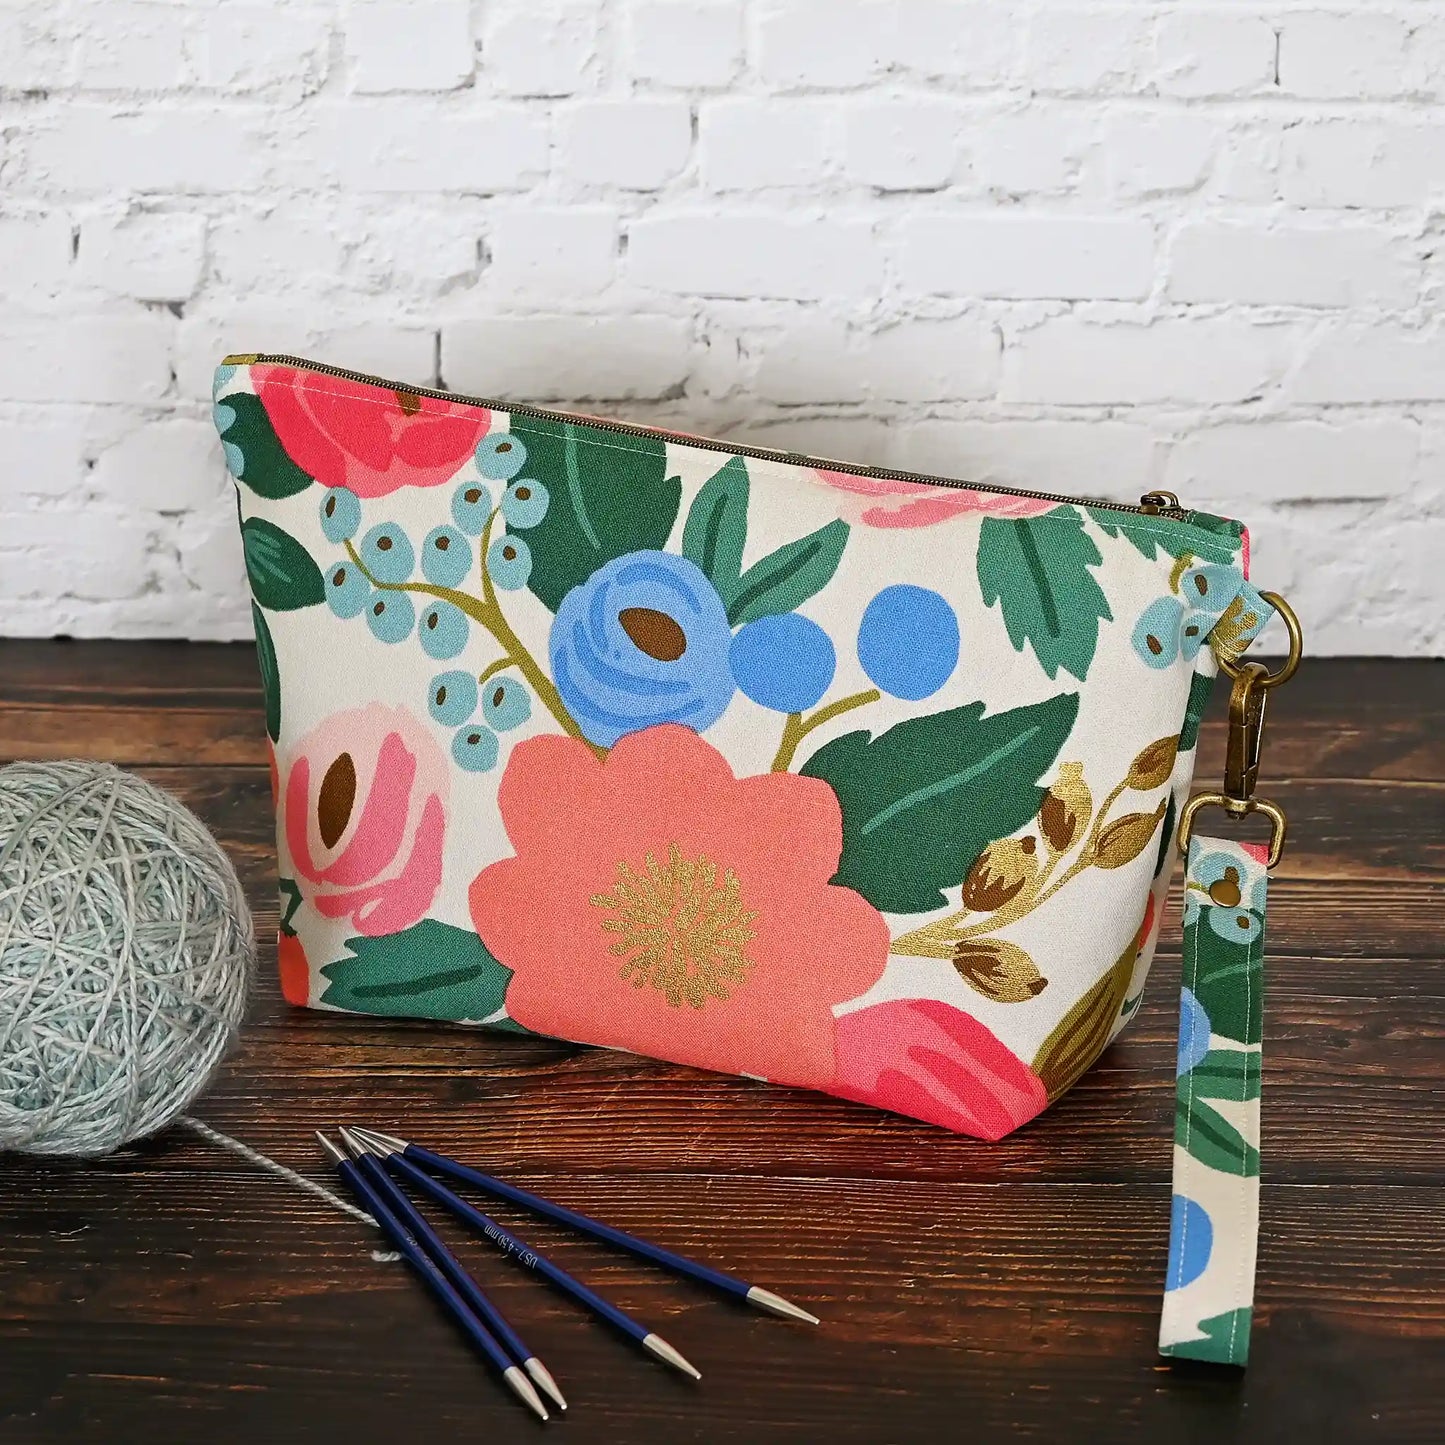 Cream floral canvas zippered pouch with removable wrist strap.  Made from Rifle Paper Co's Antique Garden.  Handmade in Nova Scotia, Canada.